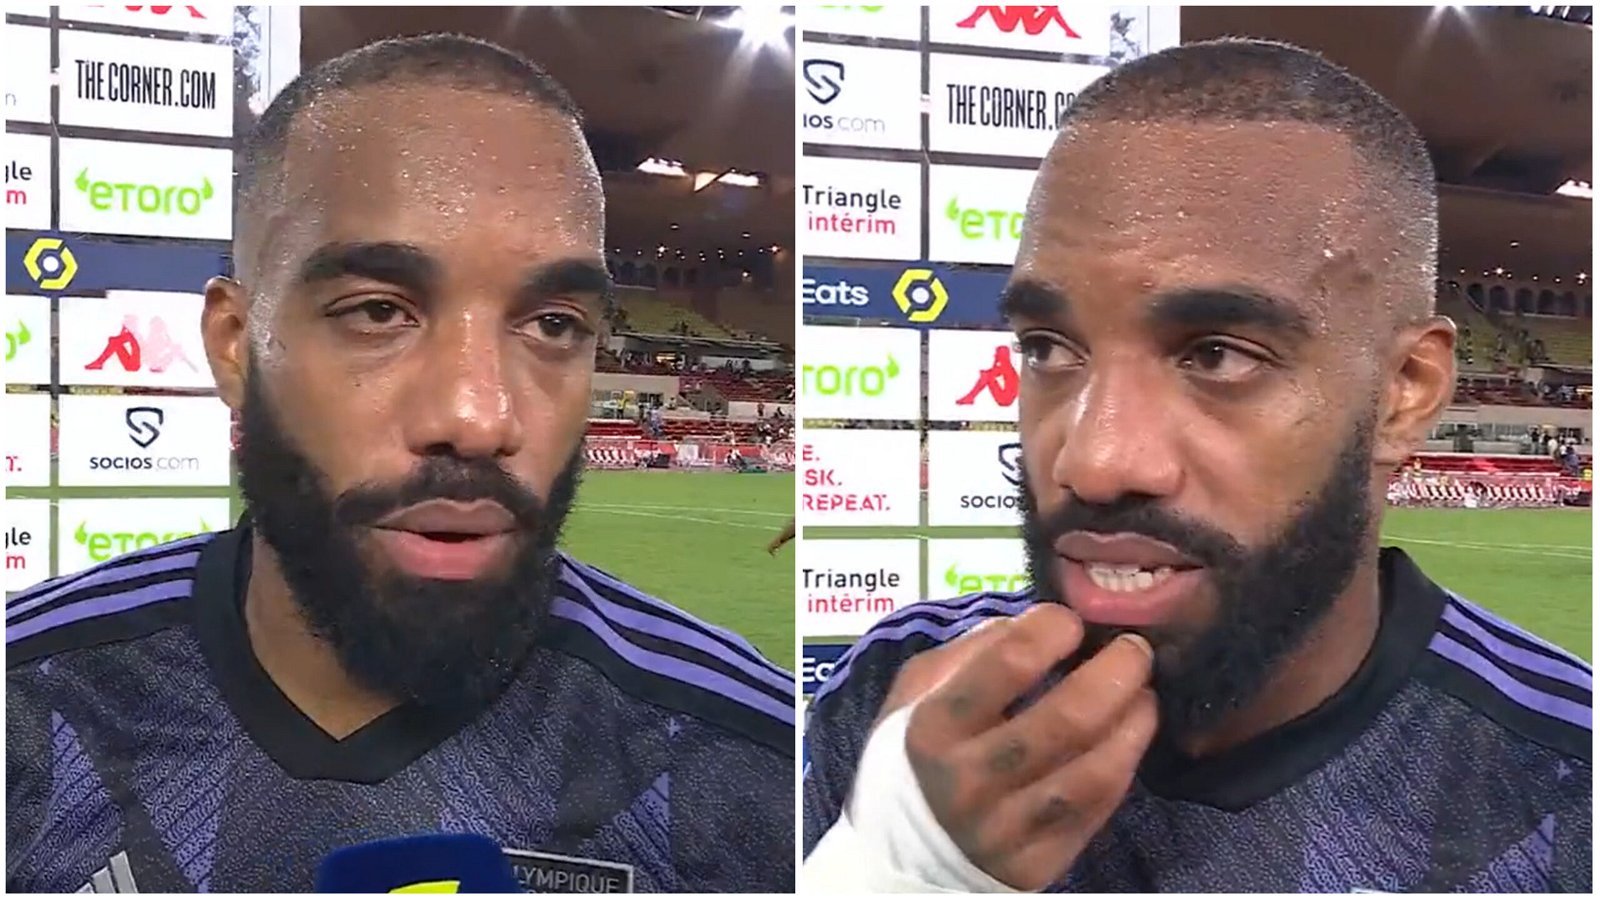 Alexandre Lacazette goes viral after completely losing his voice in  unfortunate interview - Sportings News